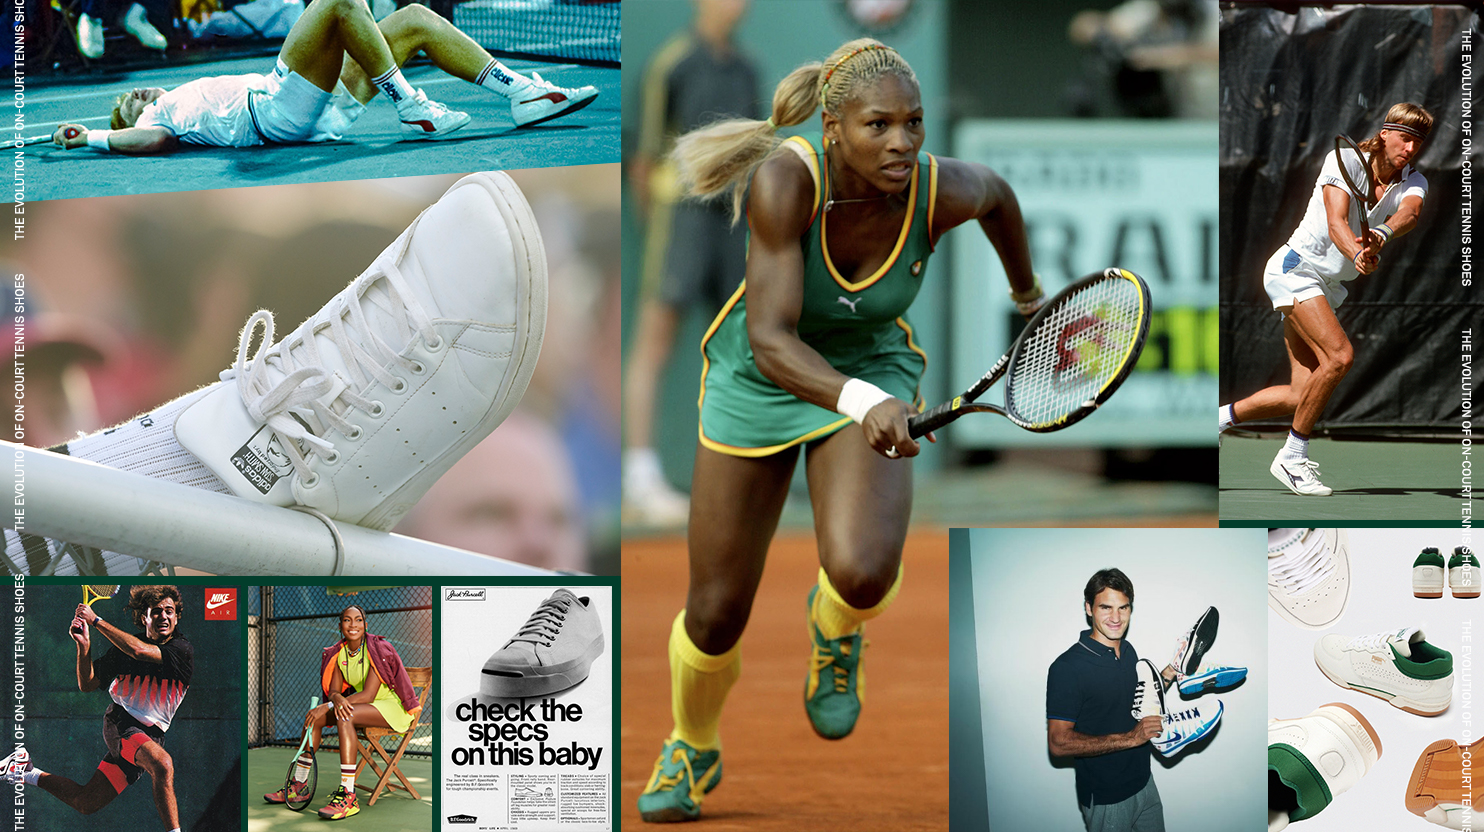 BARRICADE IS BACK: OUR MODERN TENNIS SILHOUETTE RETURNS TO COURTS